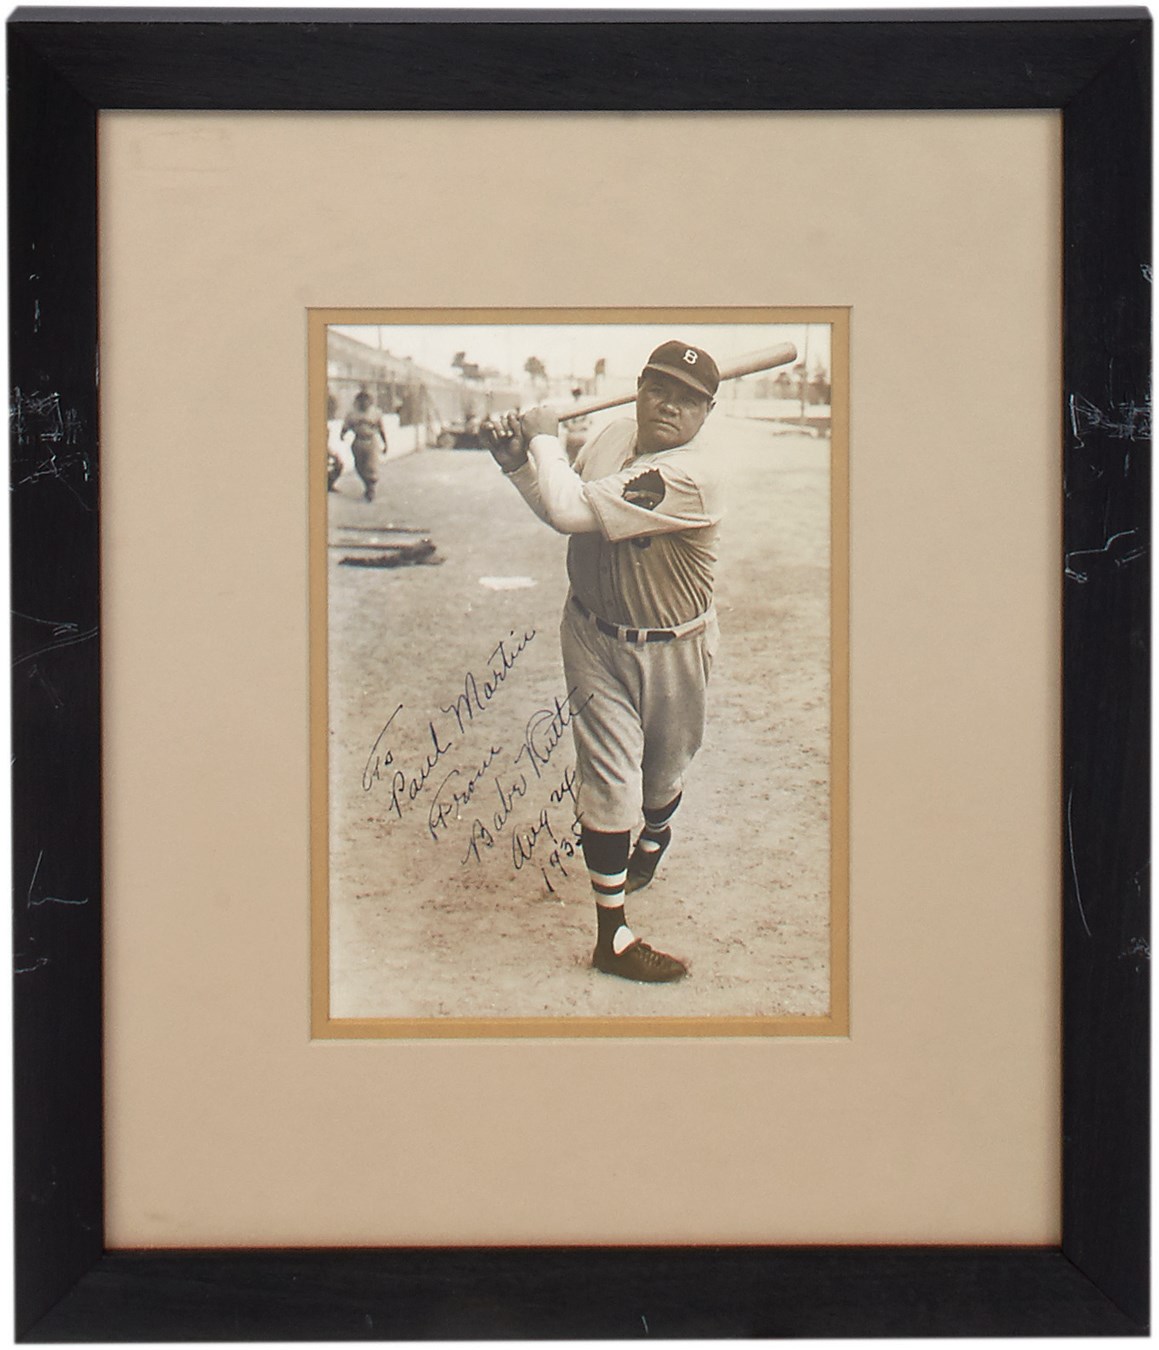 Magnificent 1935 Babe Ruth Signed Boston Braves Photograph